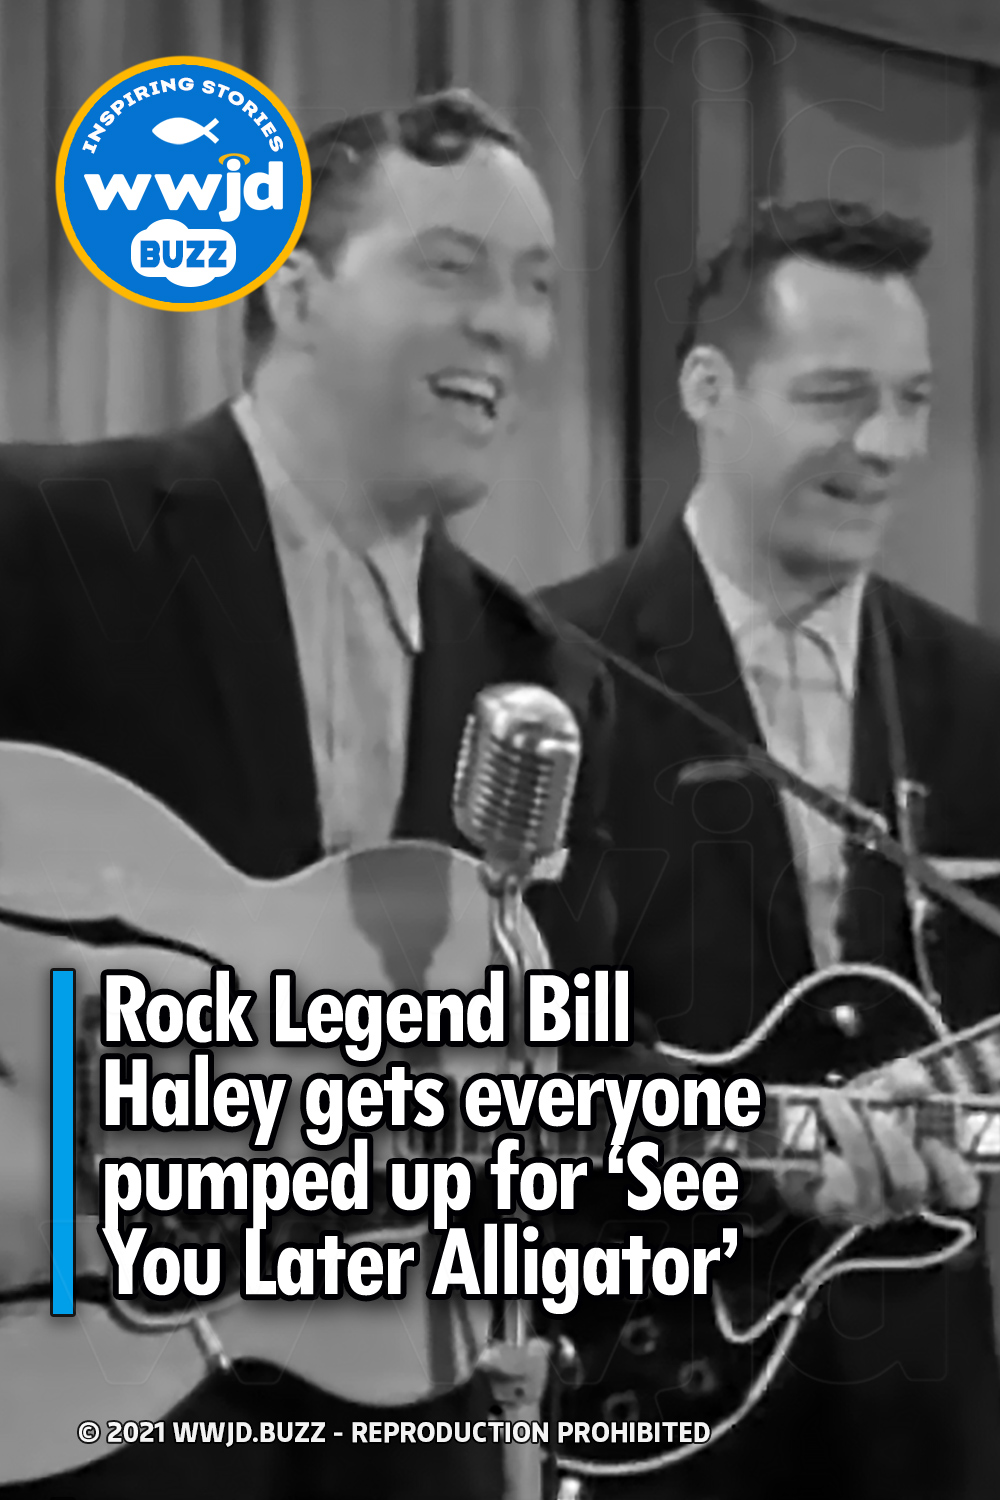 Rock Legend Bill Haley gets everyone pumped up for ‘See You Later Alligator’